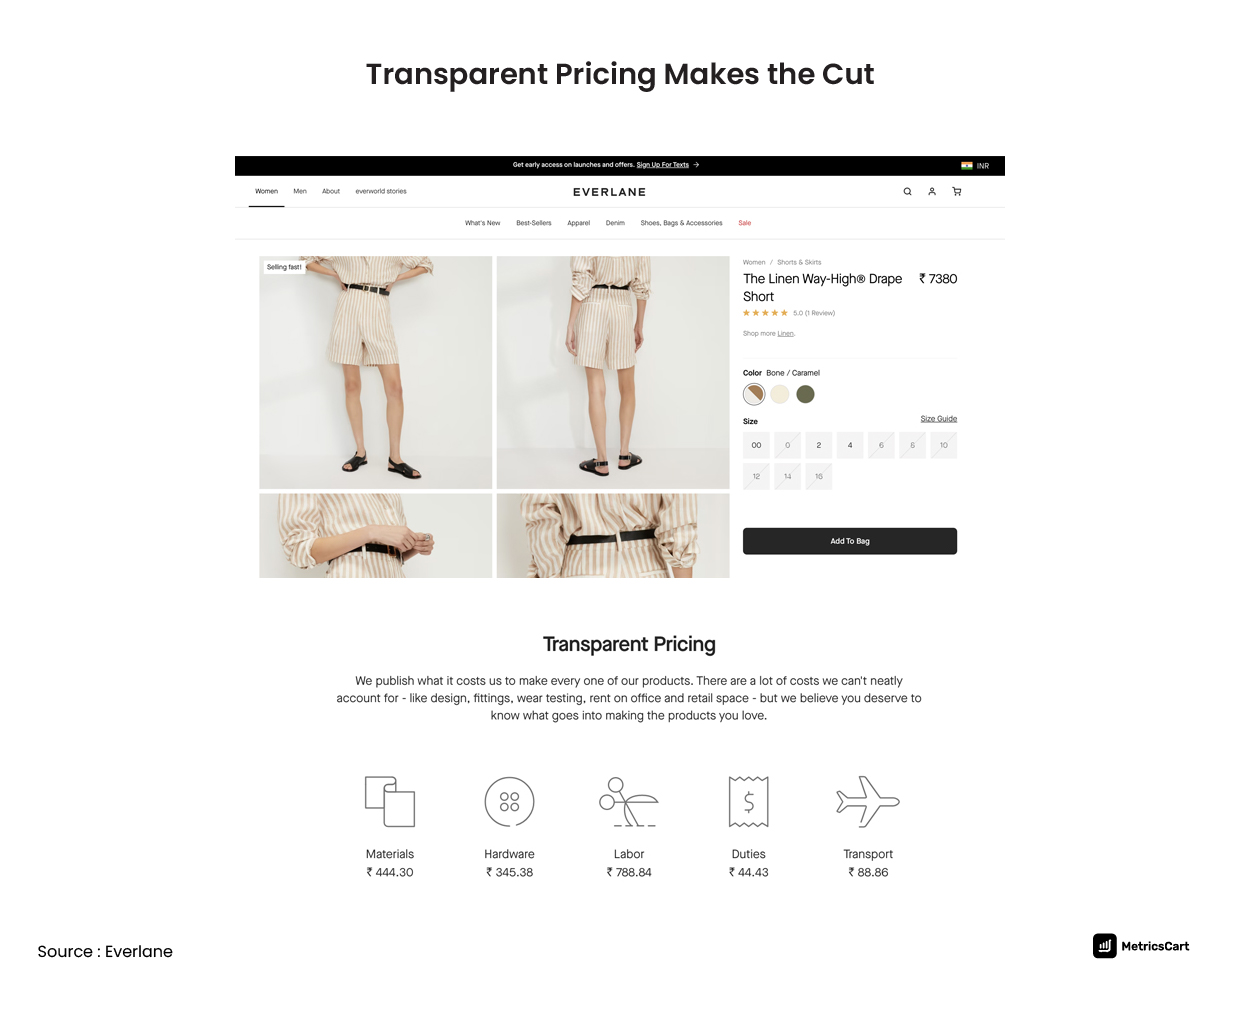 Everlane_Examples of E-Commerce Brands Using Value-Based Pricing Strategies